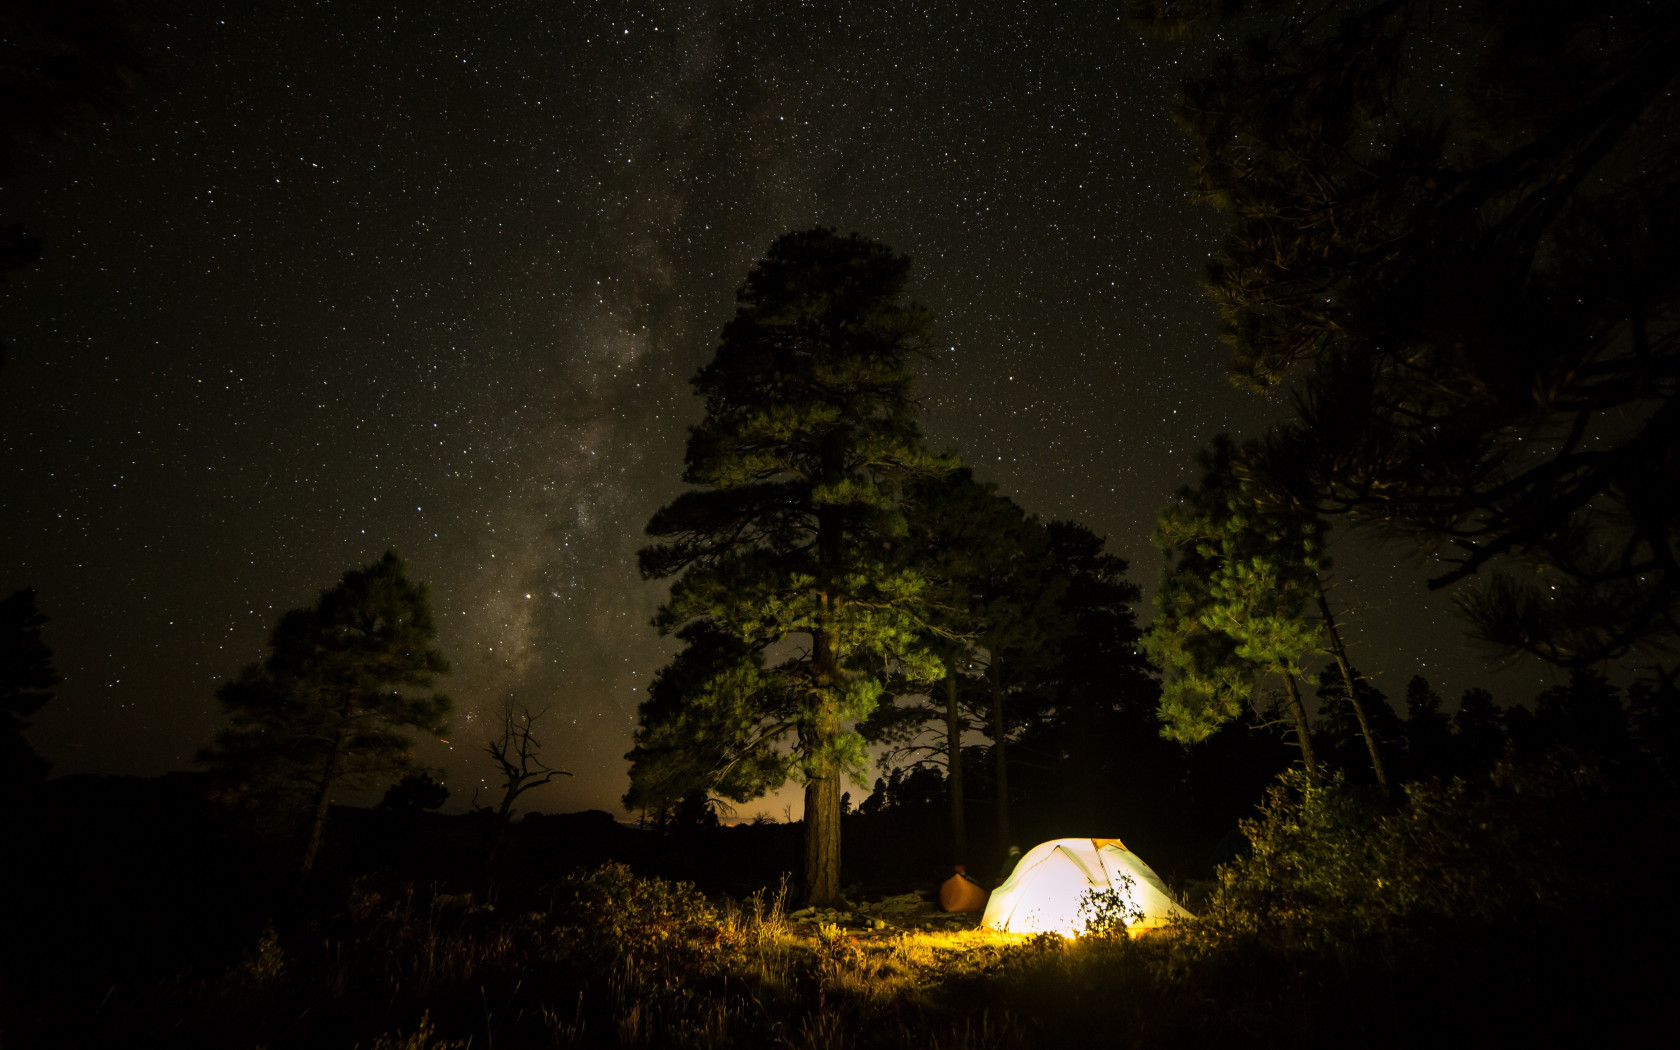 With tent under the night sky wallpaper 1680x1050